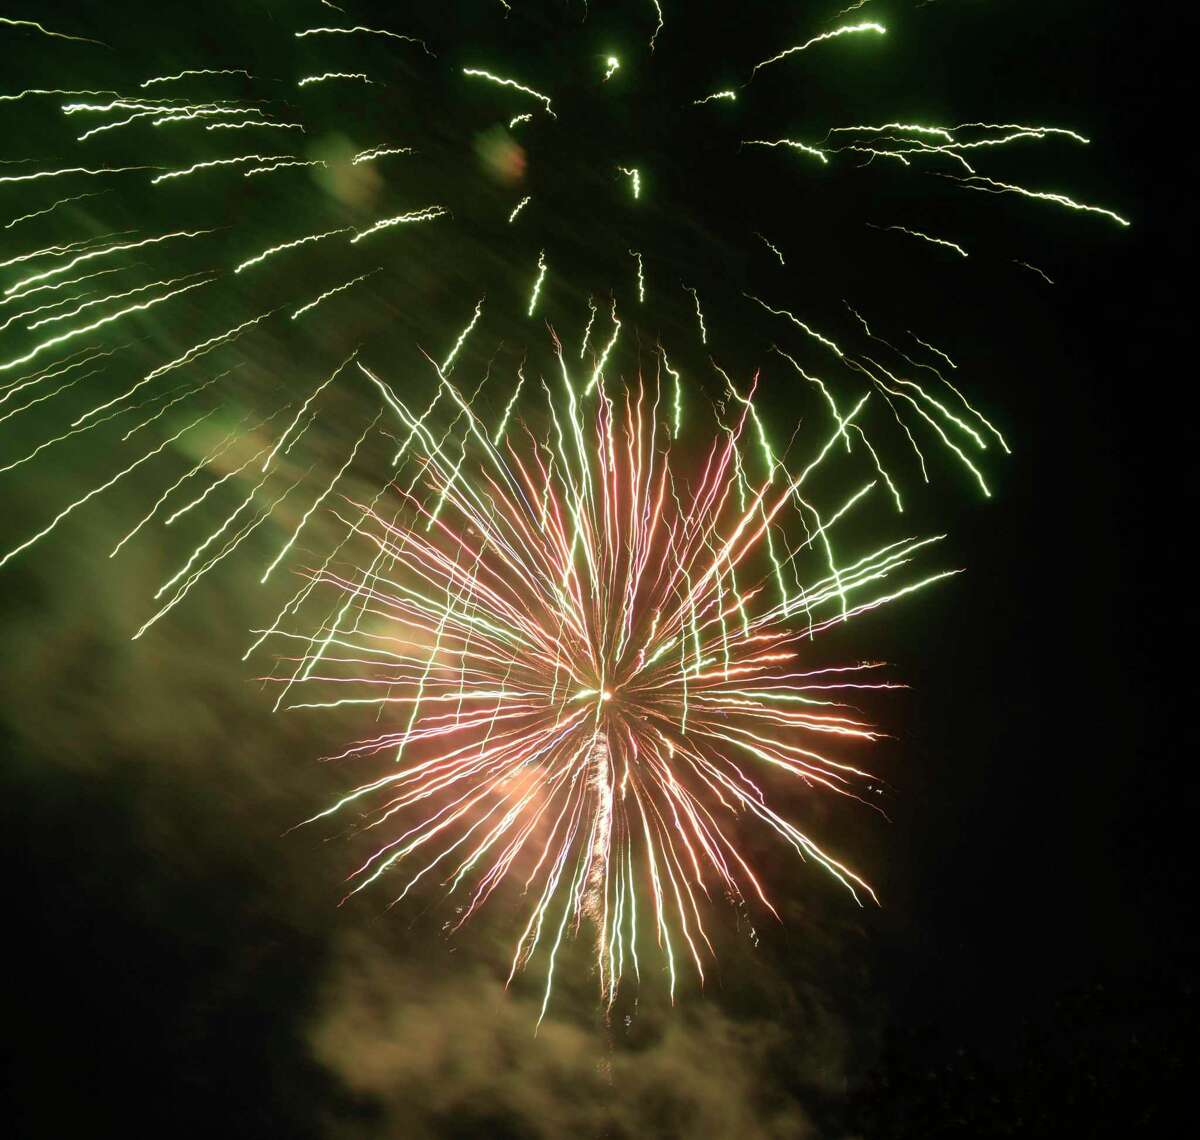 The Danbury Fair mall Summer Stage Fireworks Show. Wednesday night, July 3, 2019, in Danbury, Conn. A fireworks celebration starts at 6 p.m. Friday, Sept. 3 at the mall.